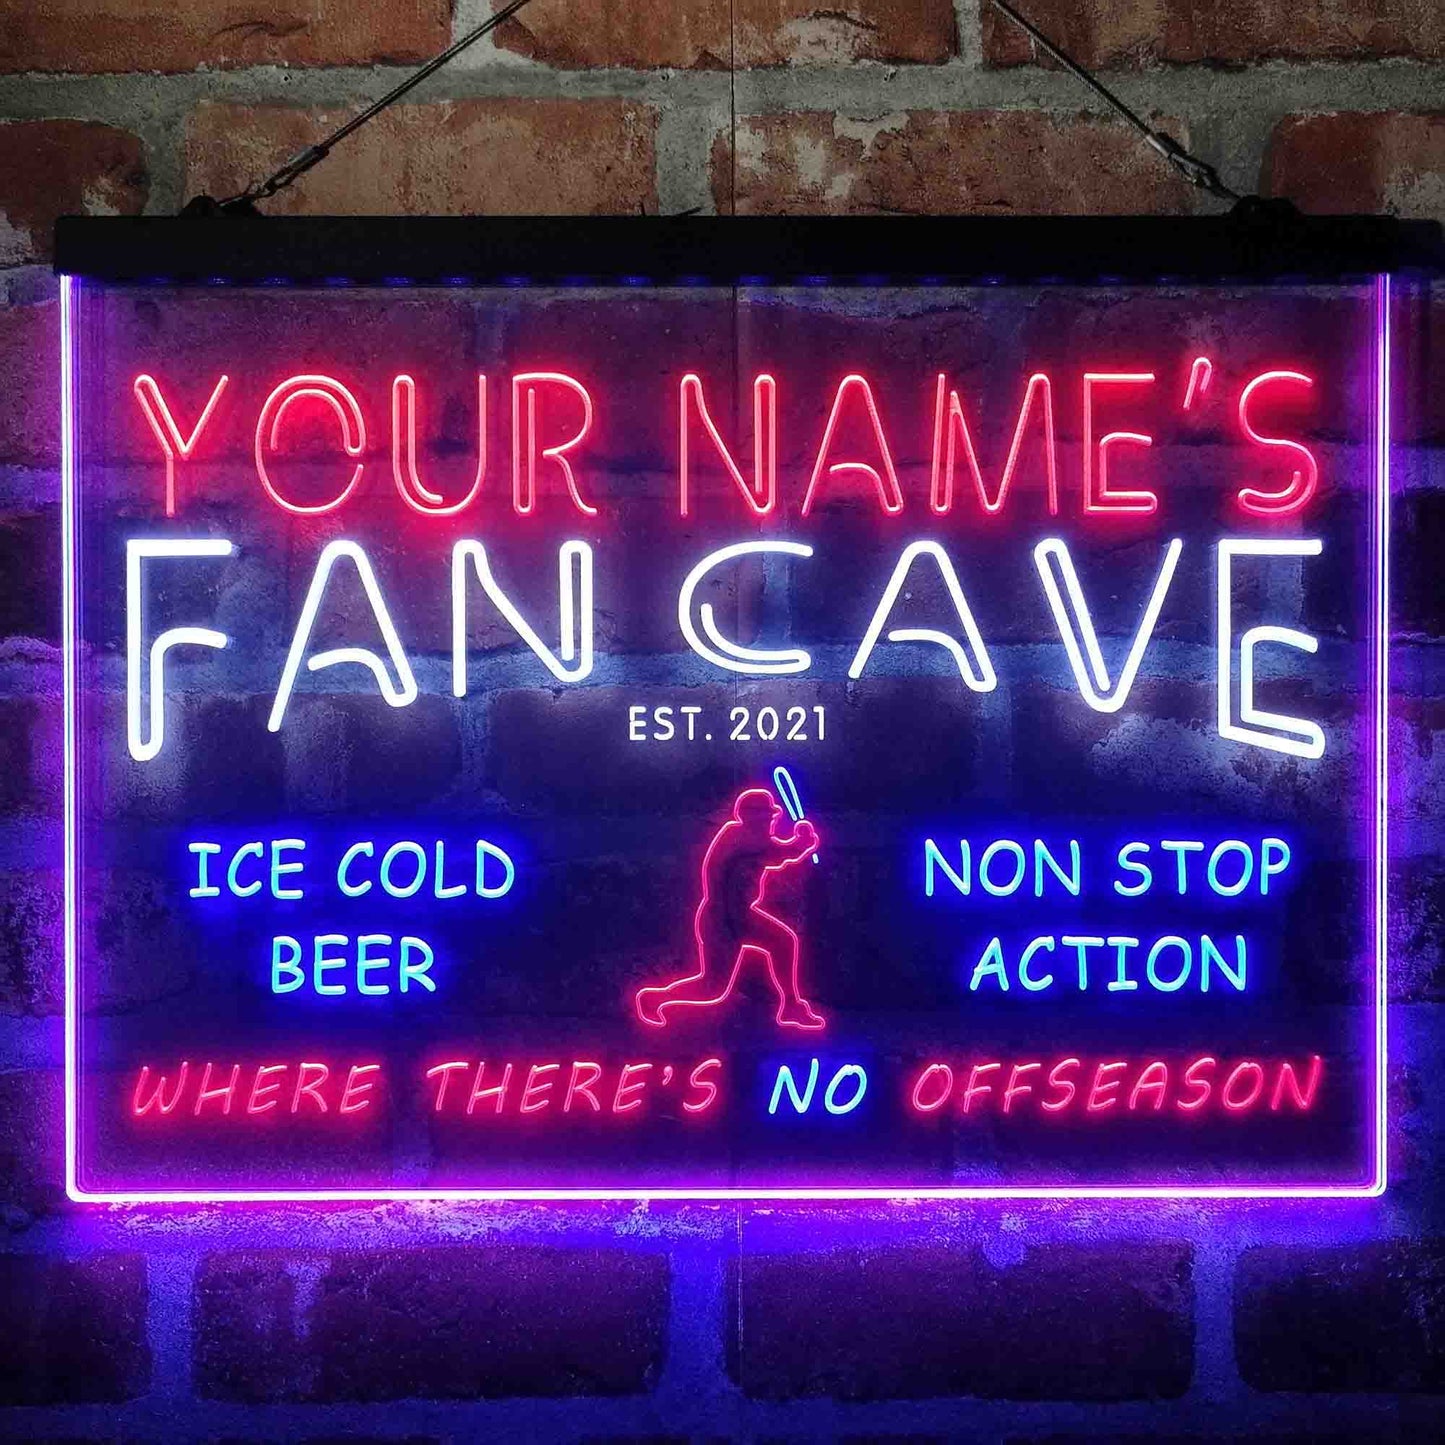 Personalized Baseball Fan Cave 3-Color LED Neon Light Sign - Way Up Gifts